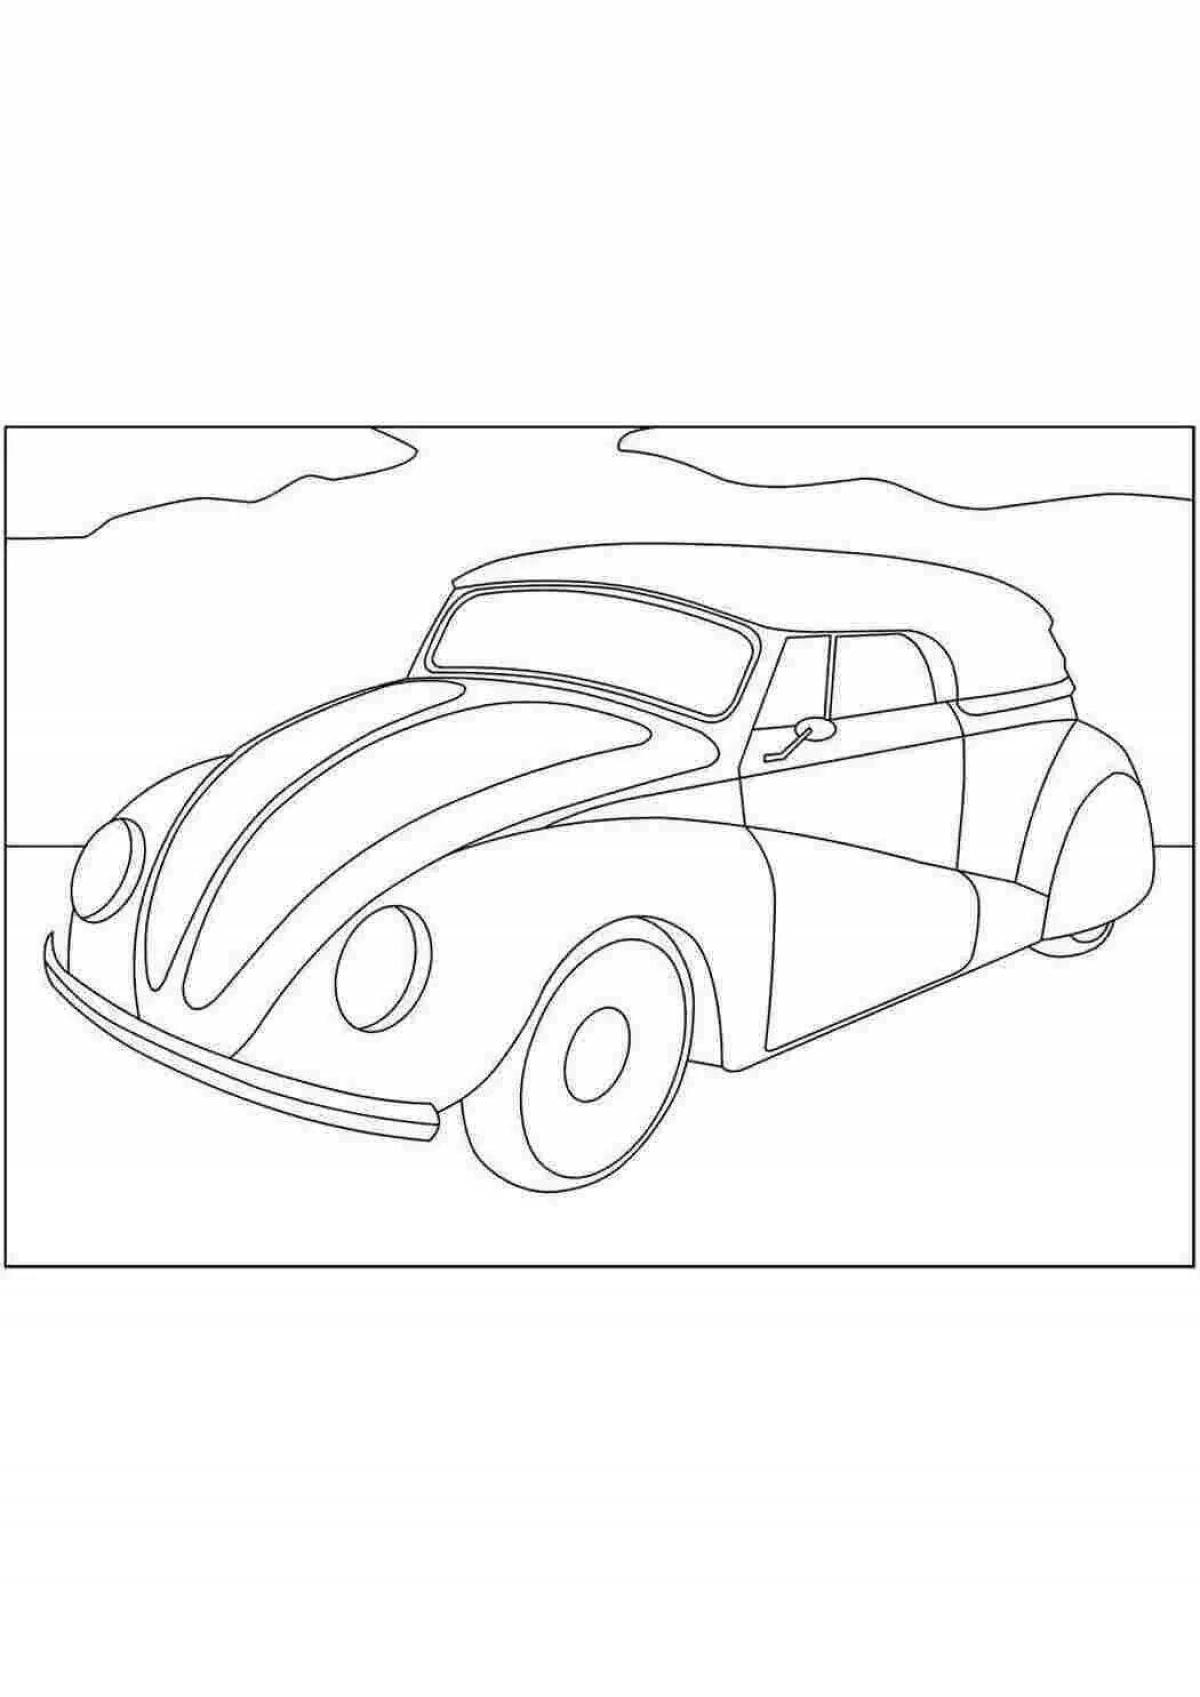 Colouring playful volkswagen cars